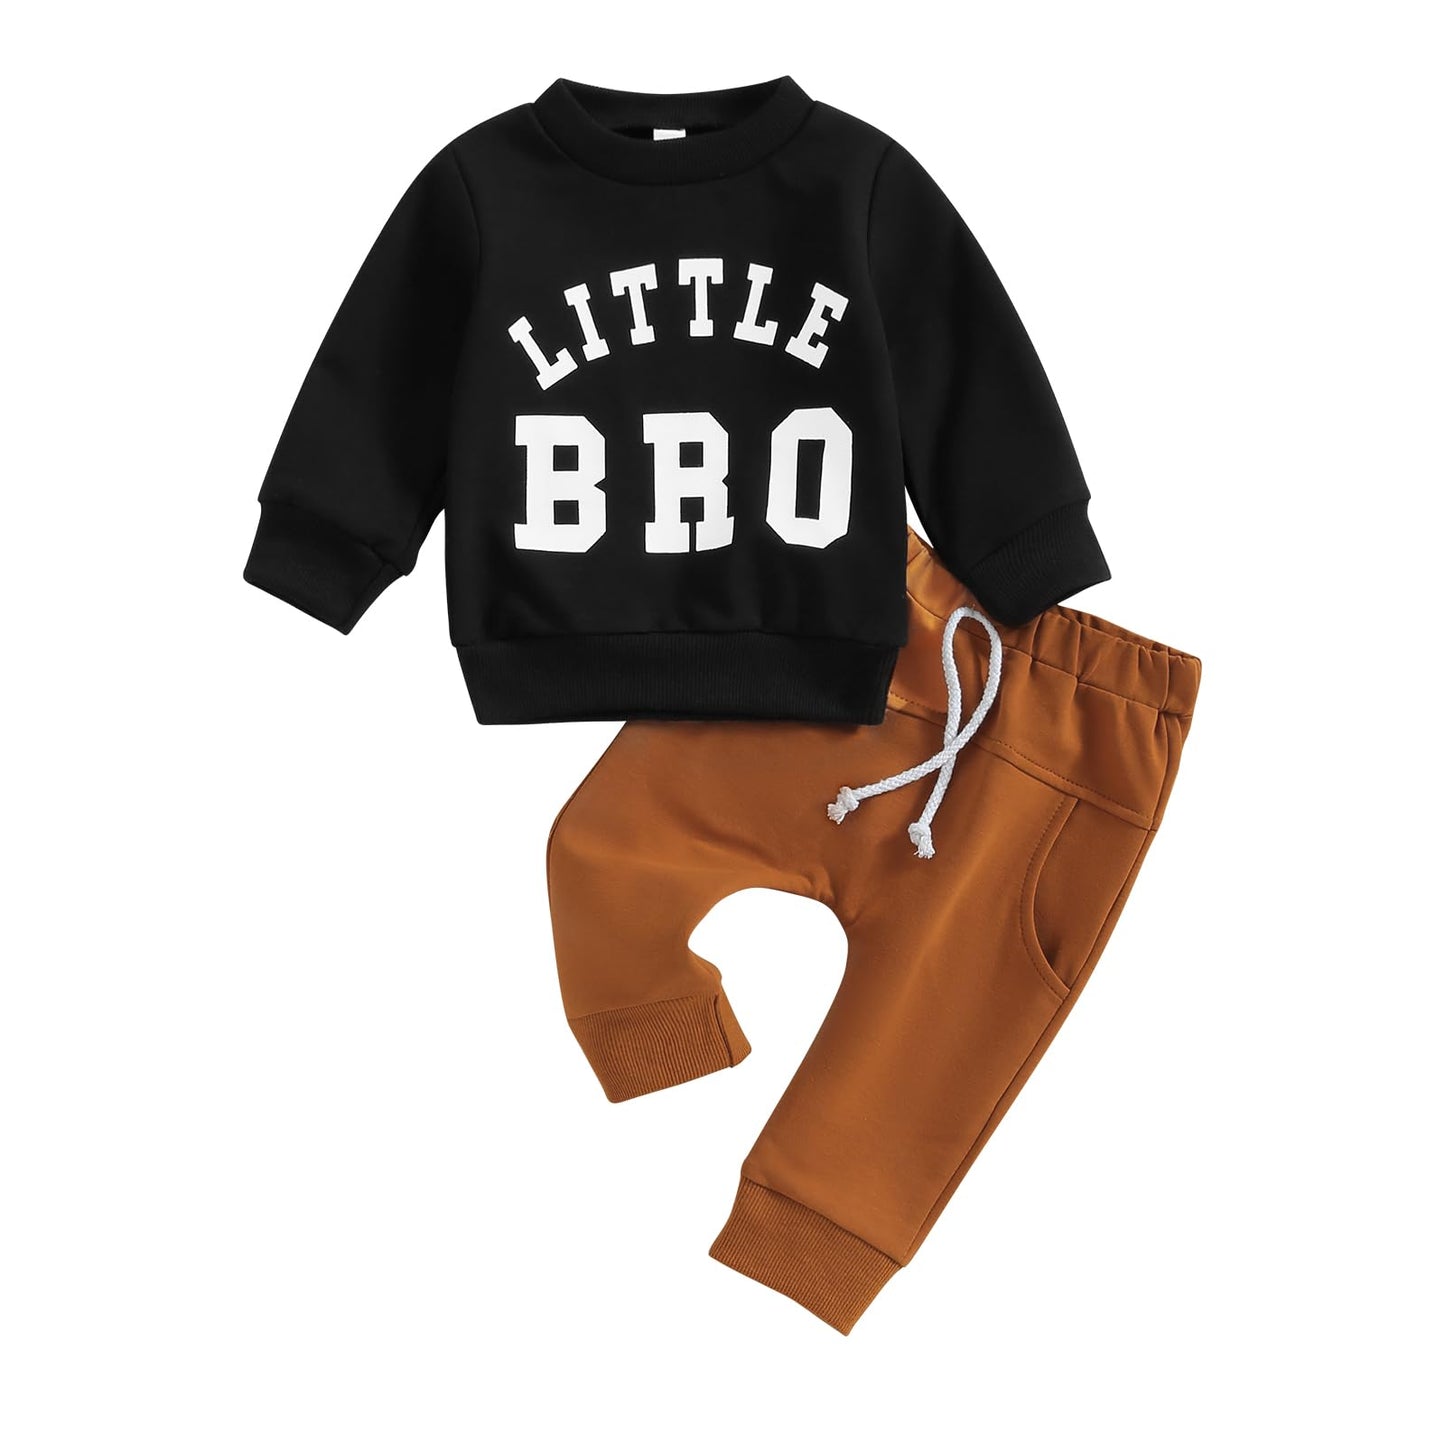 Maemukilabe Big Brother Little Brother Matching Outfit Toddler Baby Boy Long Sleeve Sweatshirt Pants Set Fall Winter Clothes 0-3M